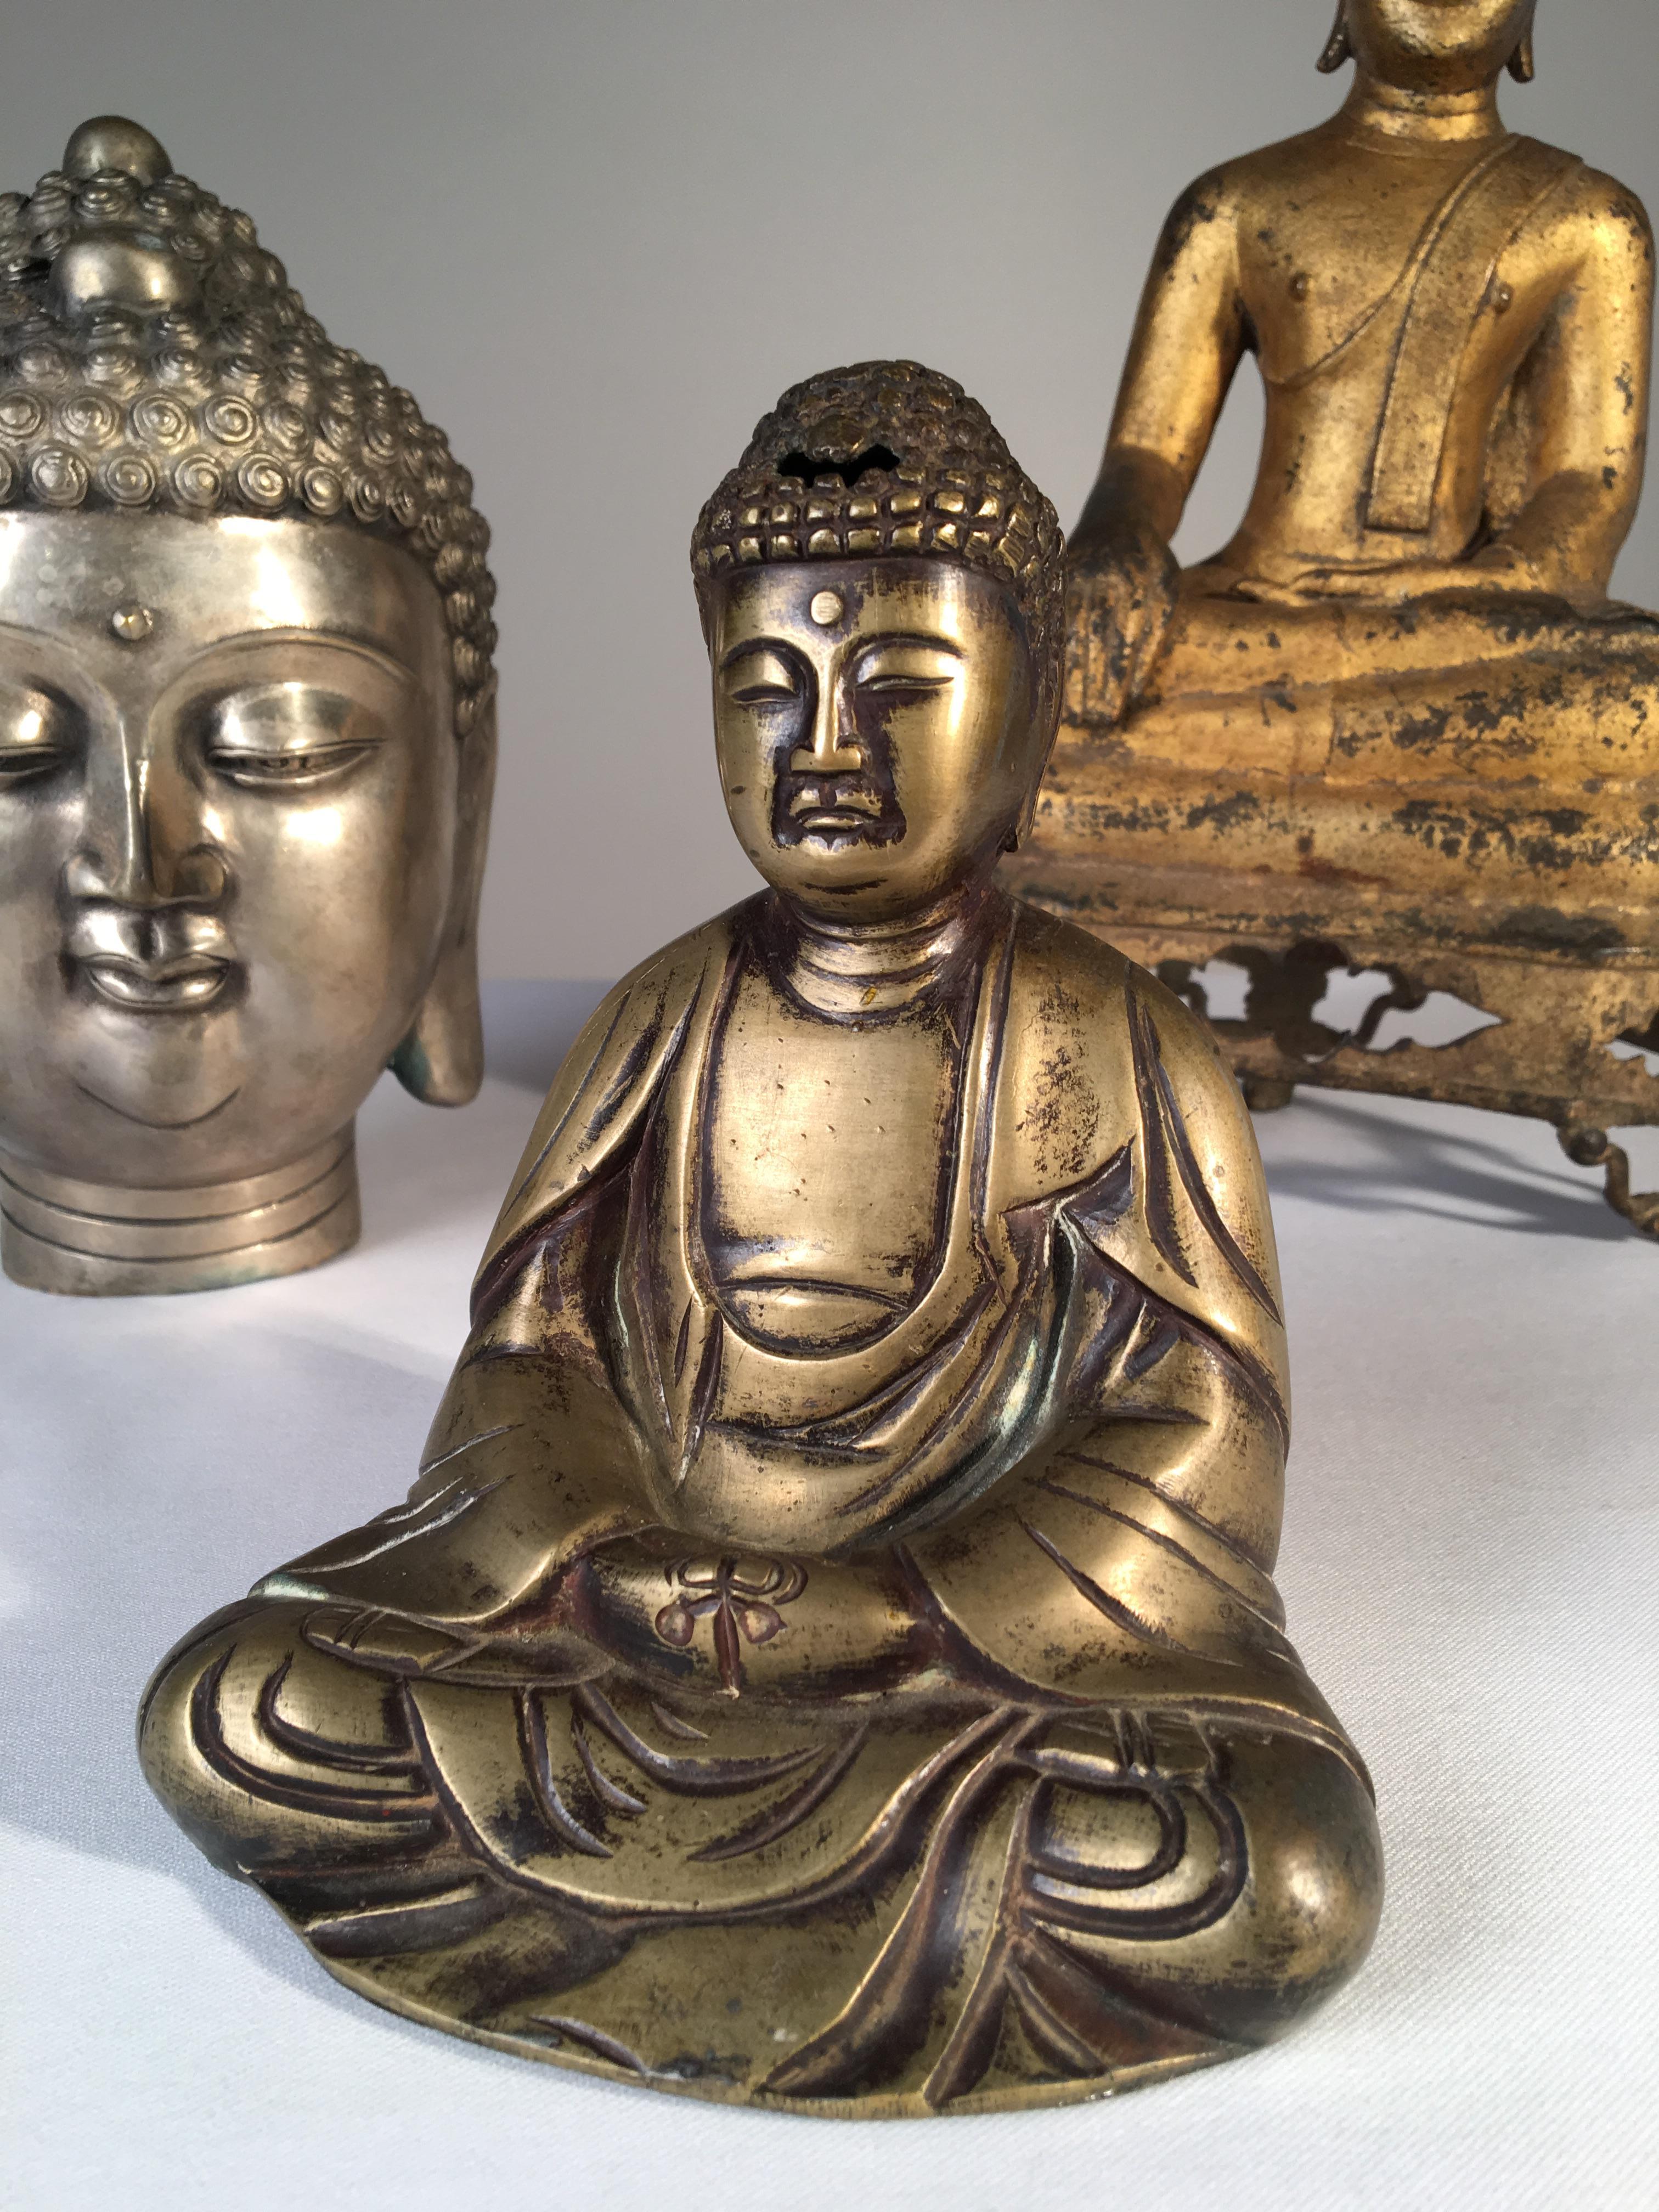 A collection of 3 Buddhas in various metals, including an antique seated gilt bronze Thai Buddha.